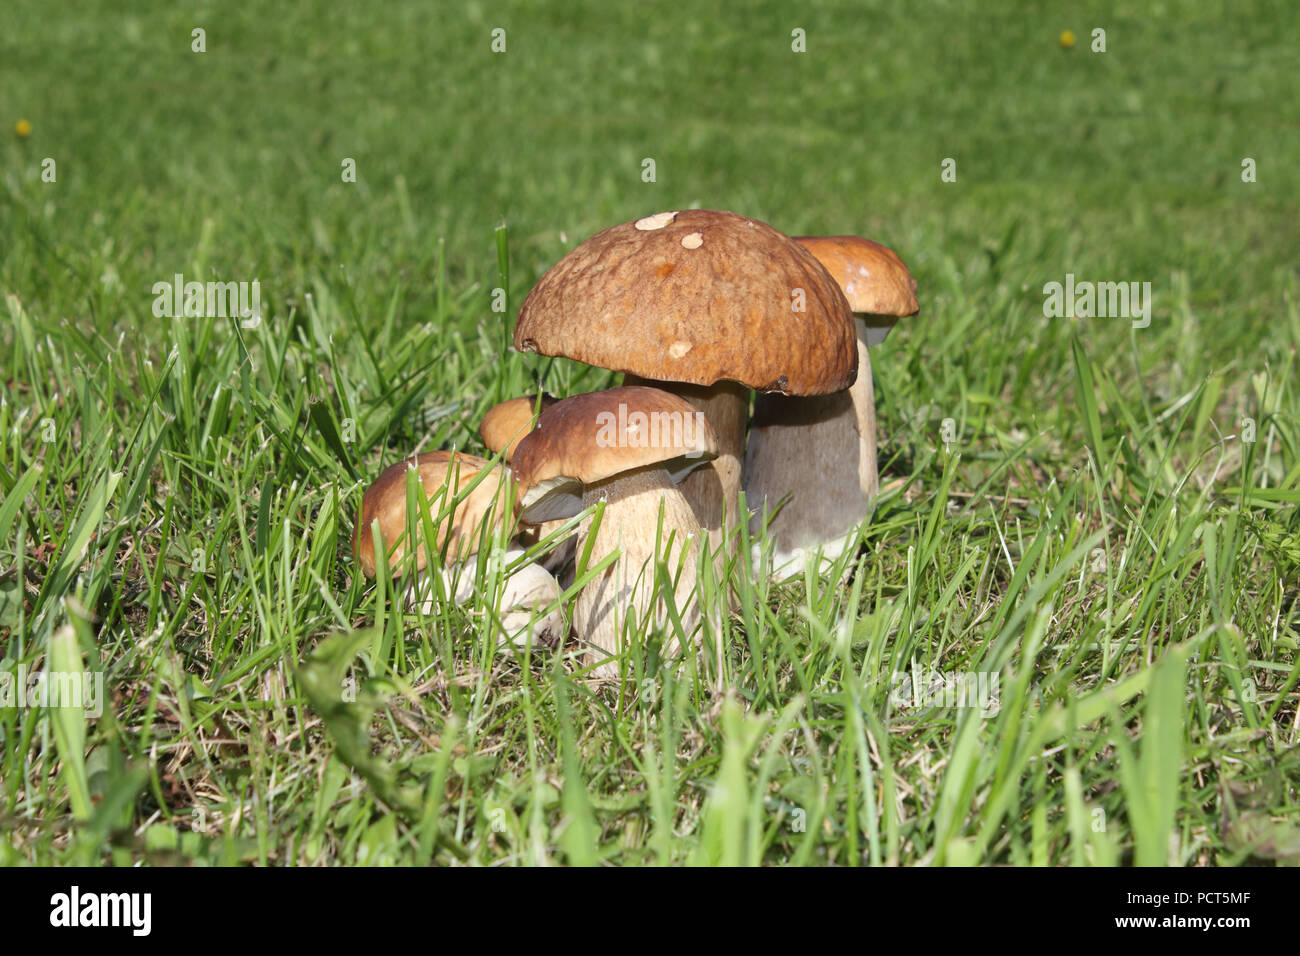 Some mushrooms in the green grass photo Stock Photo